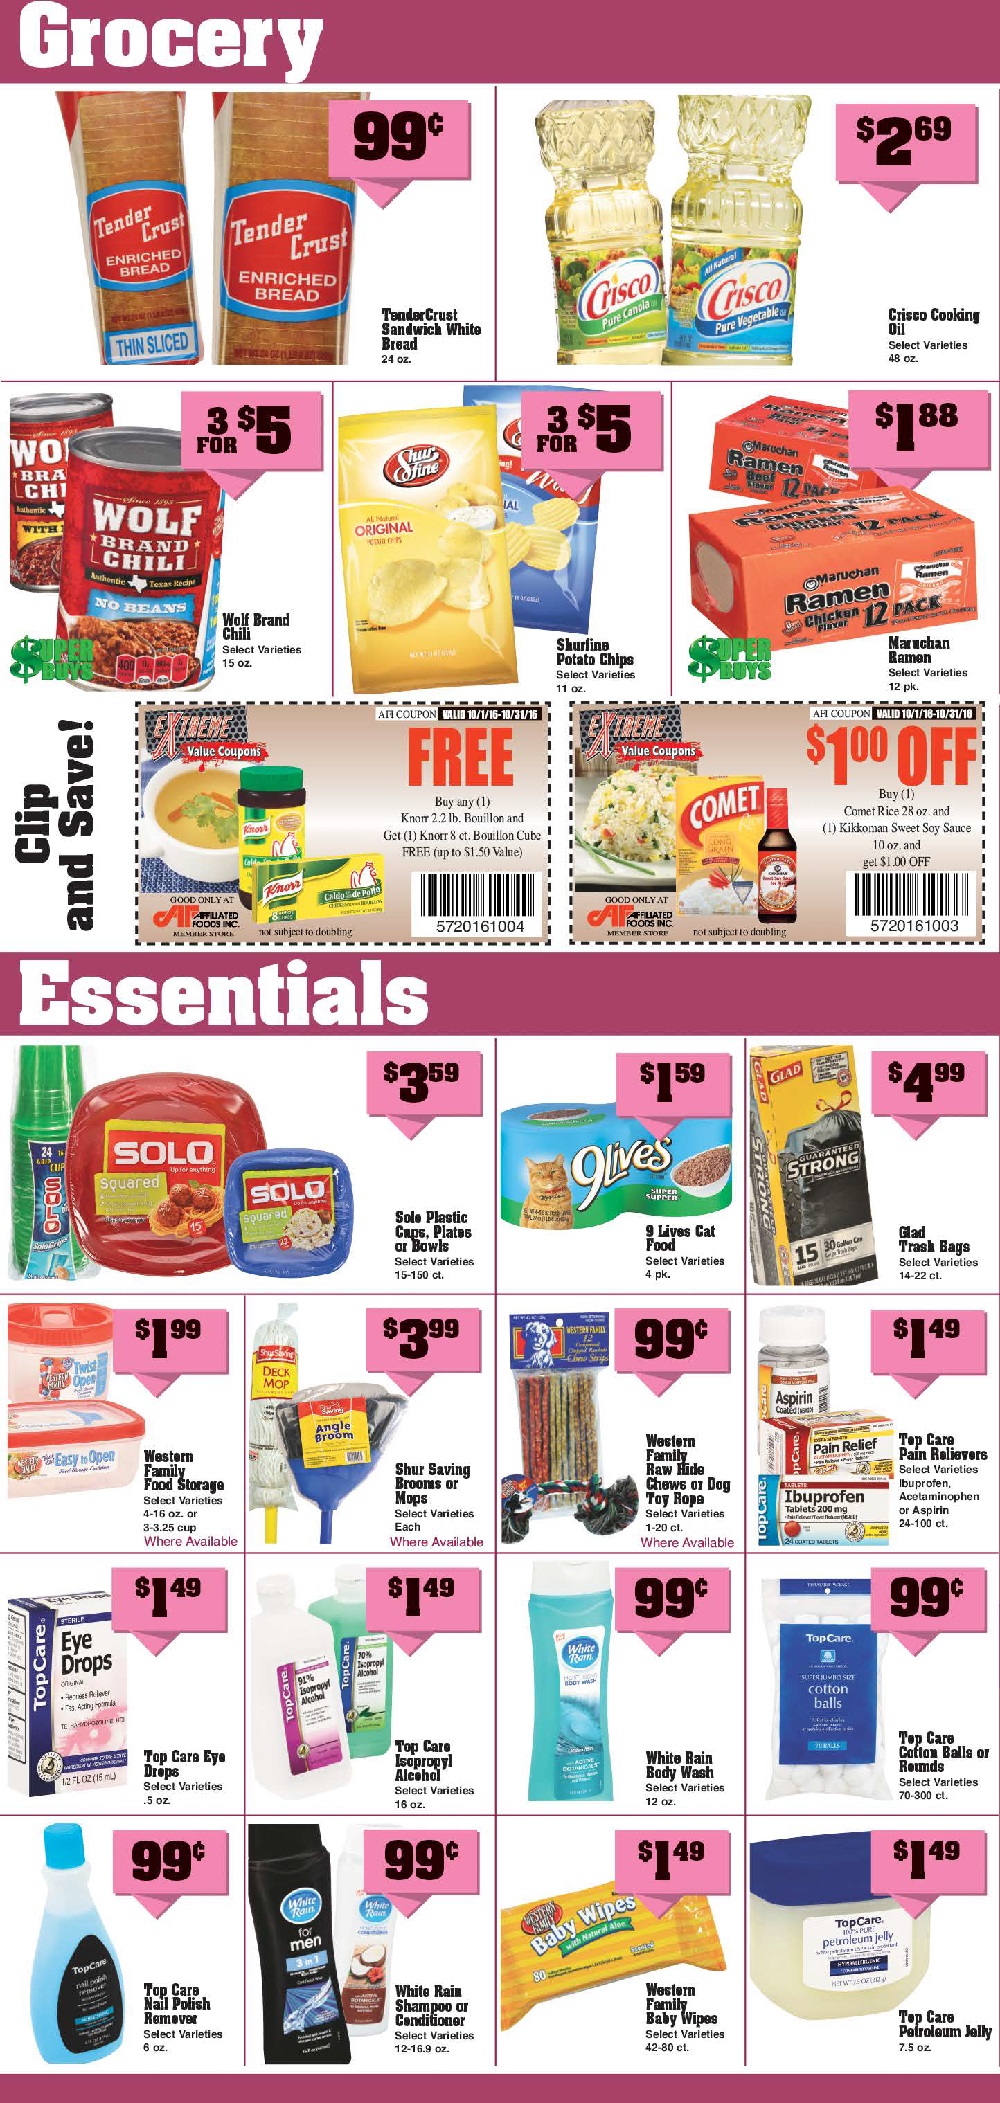 weekly-sales-for-oct-5th-11th-pg2